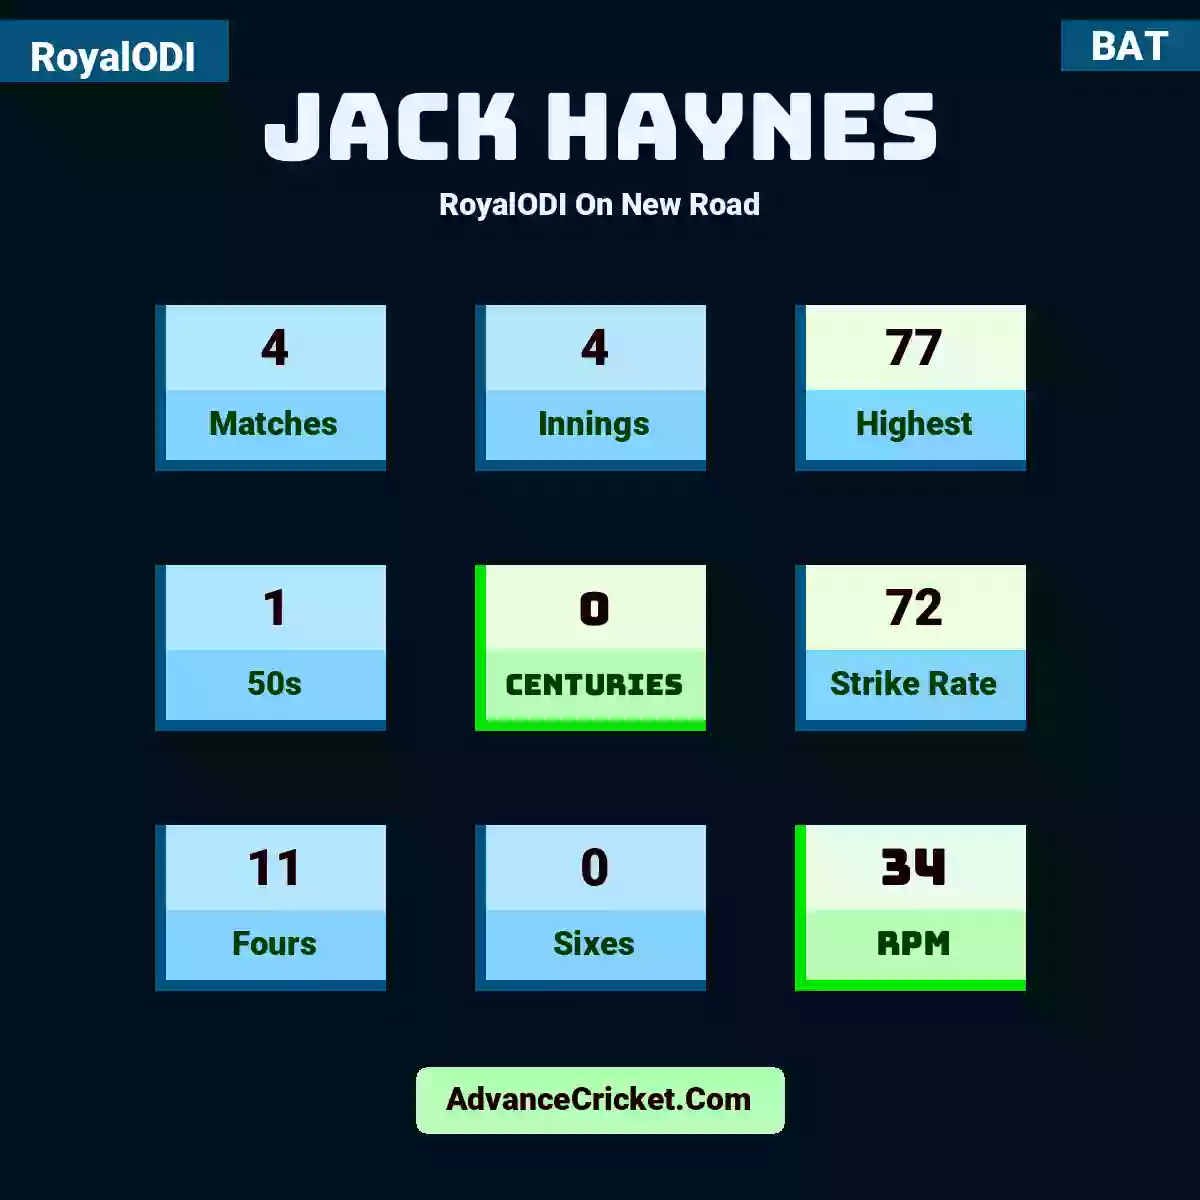 Jack Haynes RoyalODI  On New Road, Jack Haynes played 4 matches, scored 77 runs as highest, 1 half-centuries, and 0 centuries, with a strike rate of 72. J.Haynes hit 11 fours and 0 sixes, with an RPM of 34.